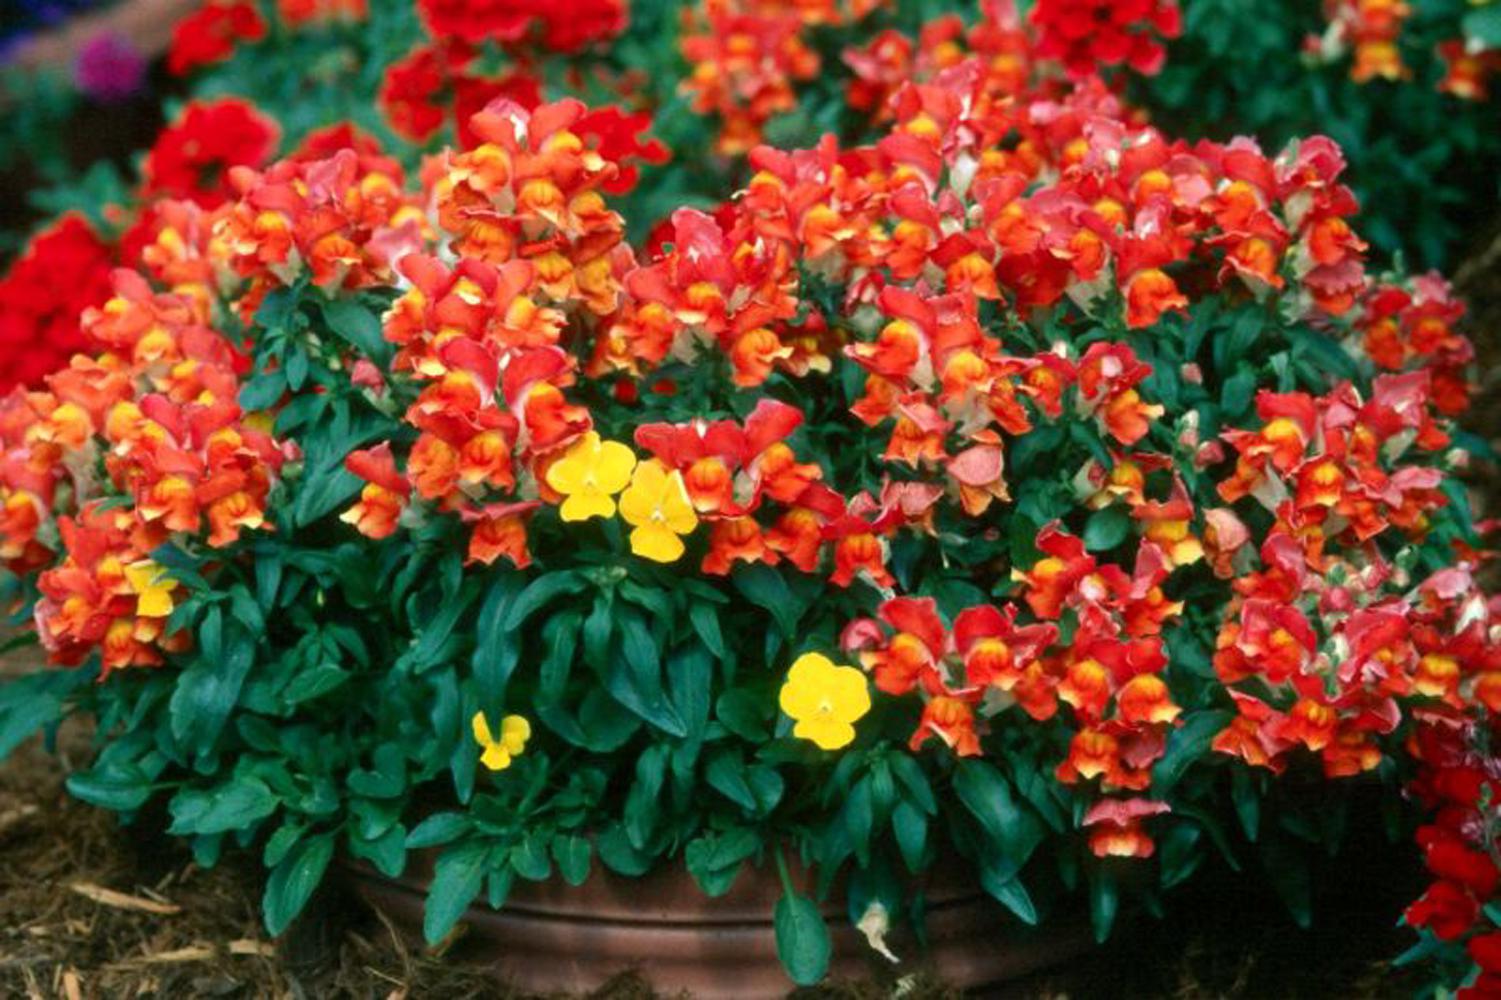 These red Montego  snapdragons demontrate how showy single-colored plantings can be when combined with yellow pansies.